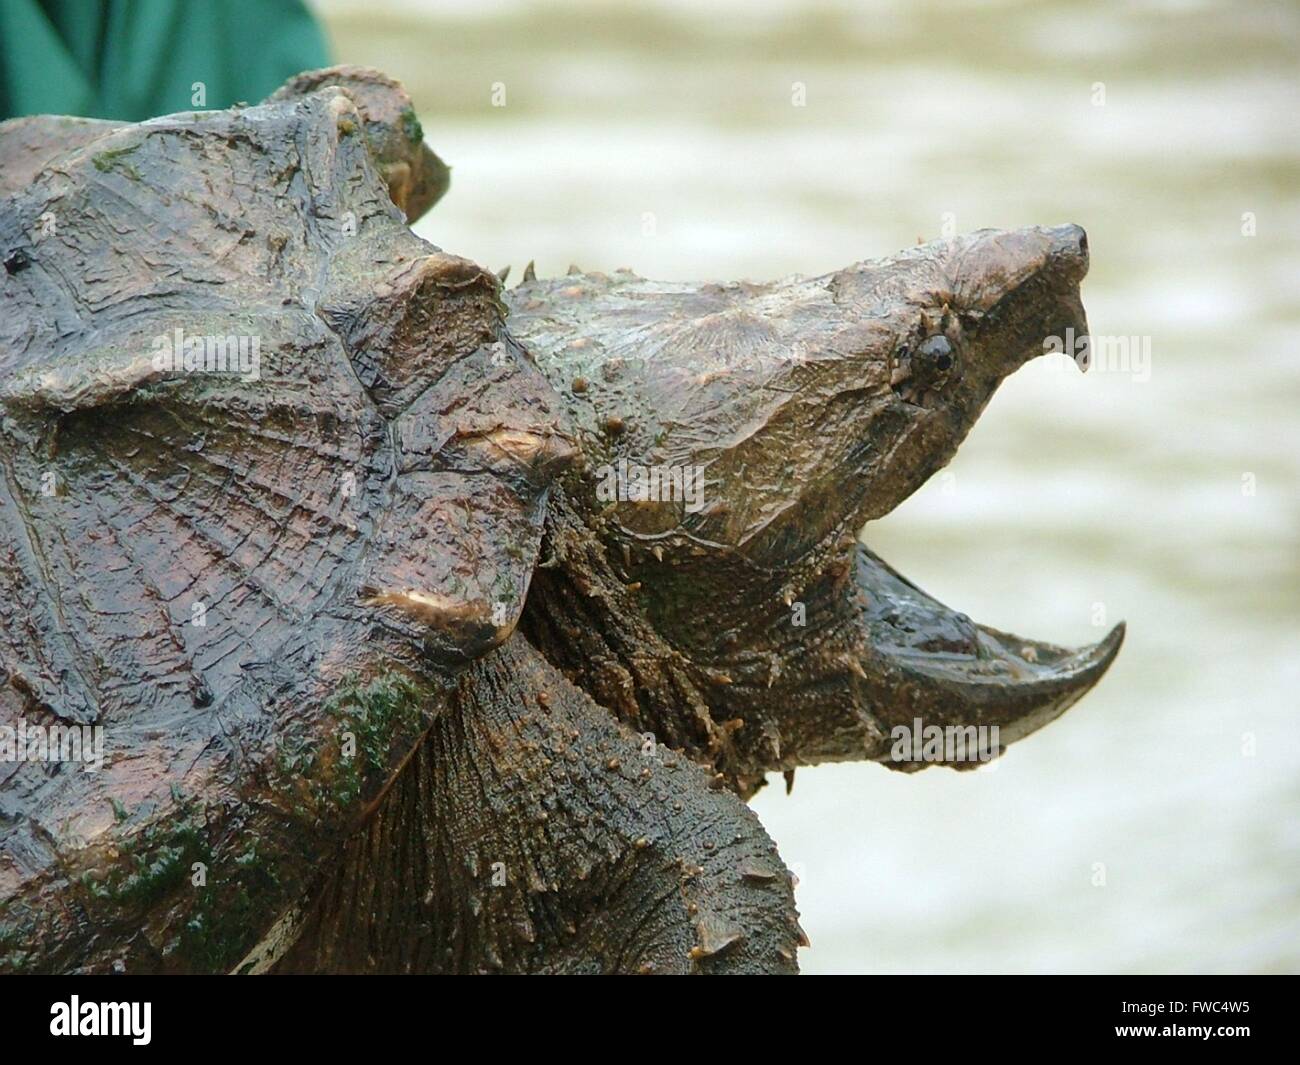 A U.S. Fish & Wildlife officer holds a Alligator Snapping Turtle at Cahaba River National Wildlife Refuge in Bibb County, Alabama. Stock Photo